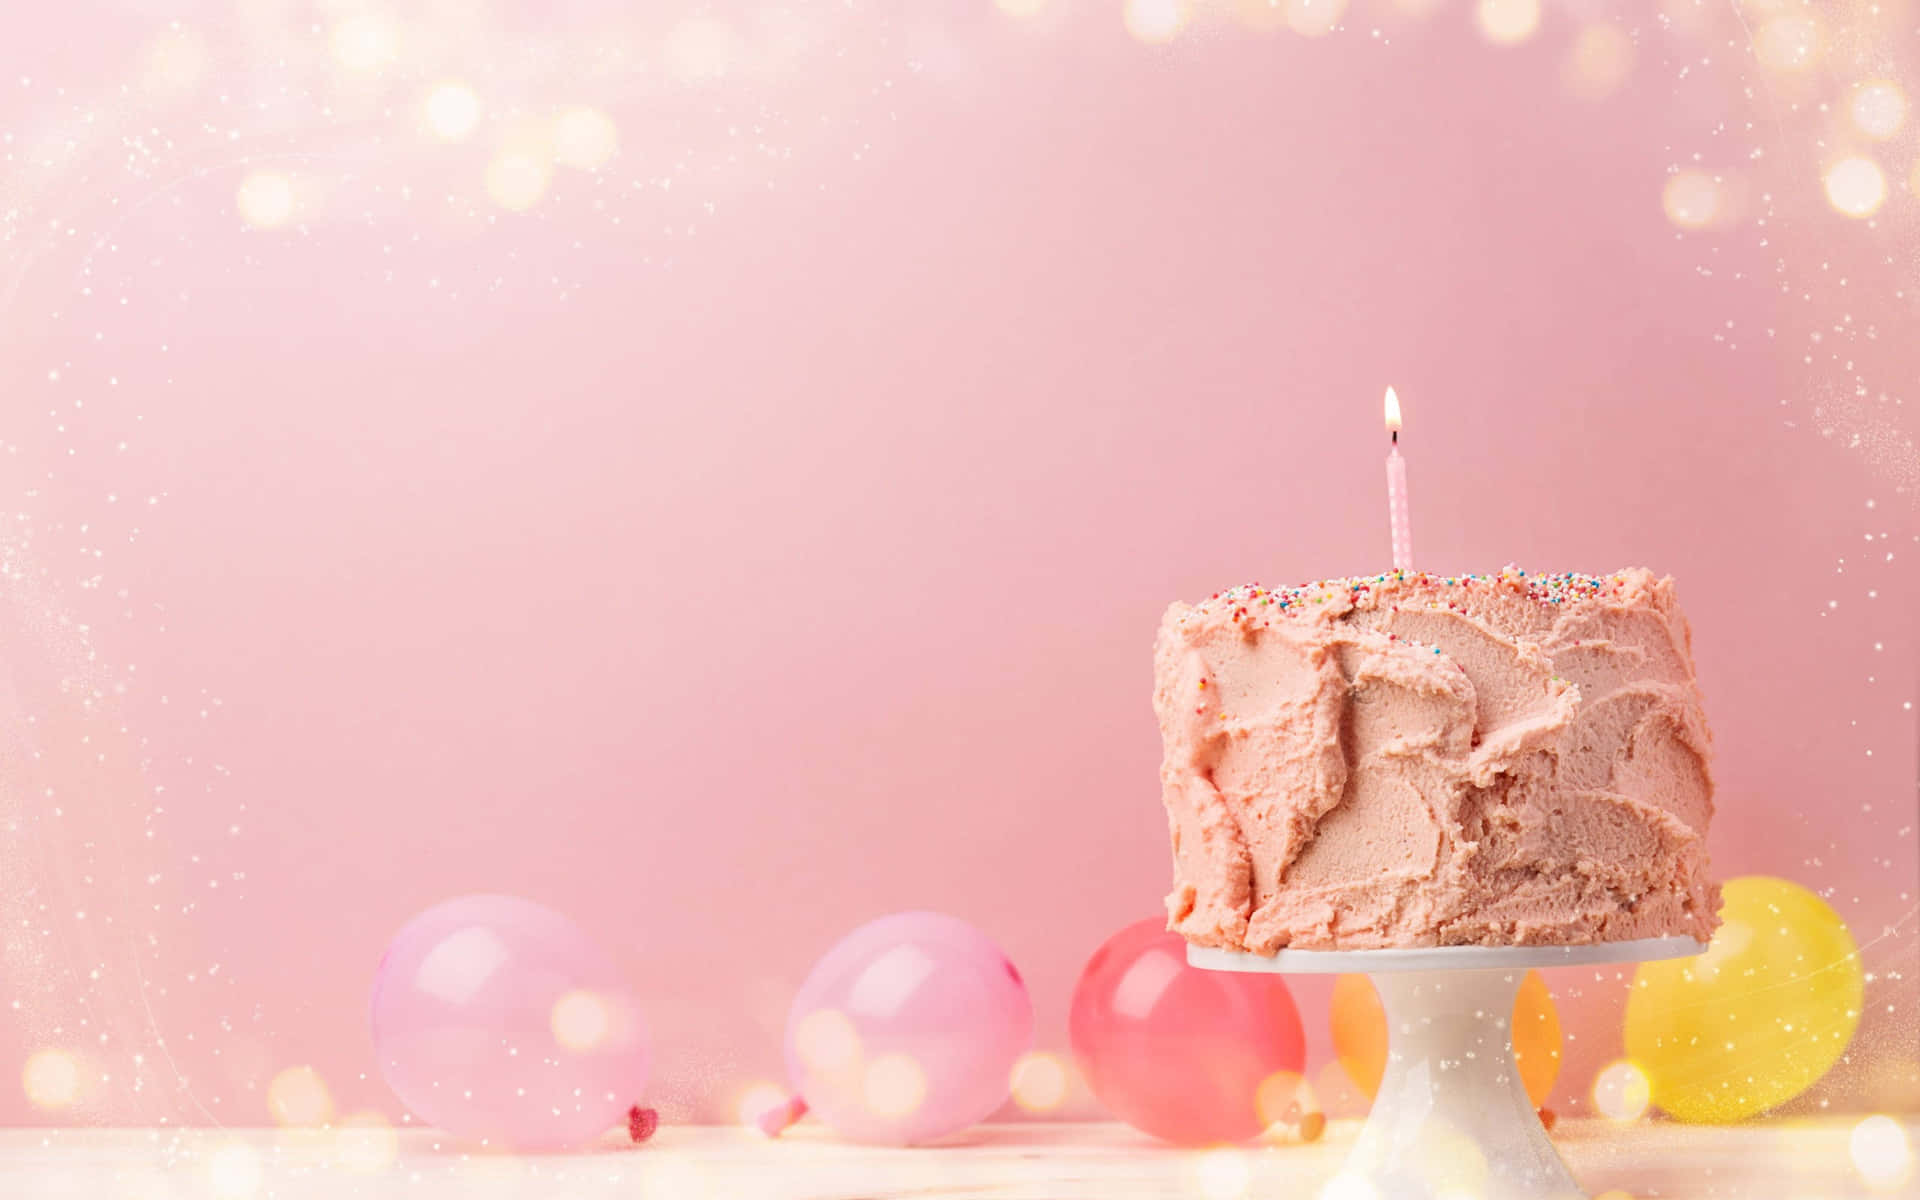 A Pink Cake On A White Plate With Balloons On A Pink Background Wallpaper